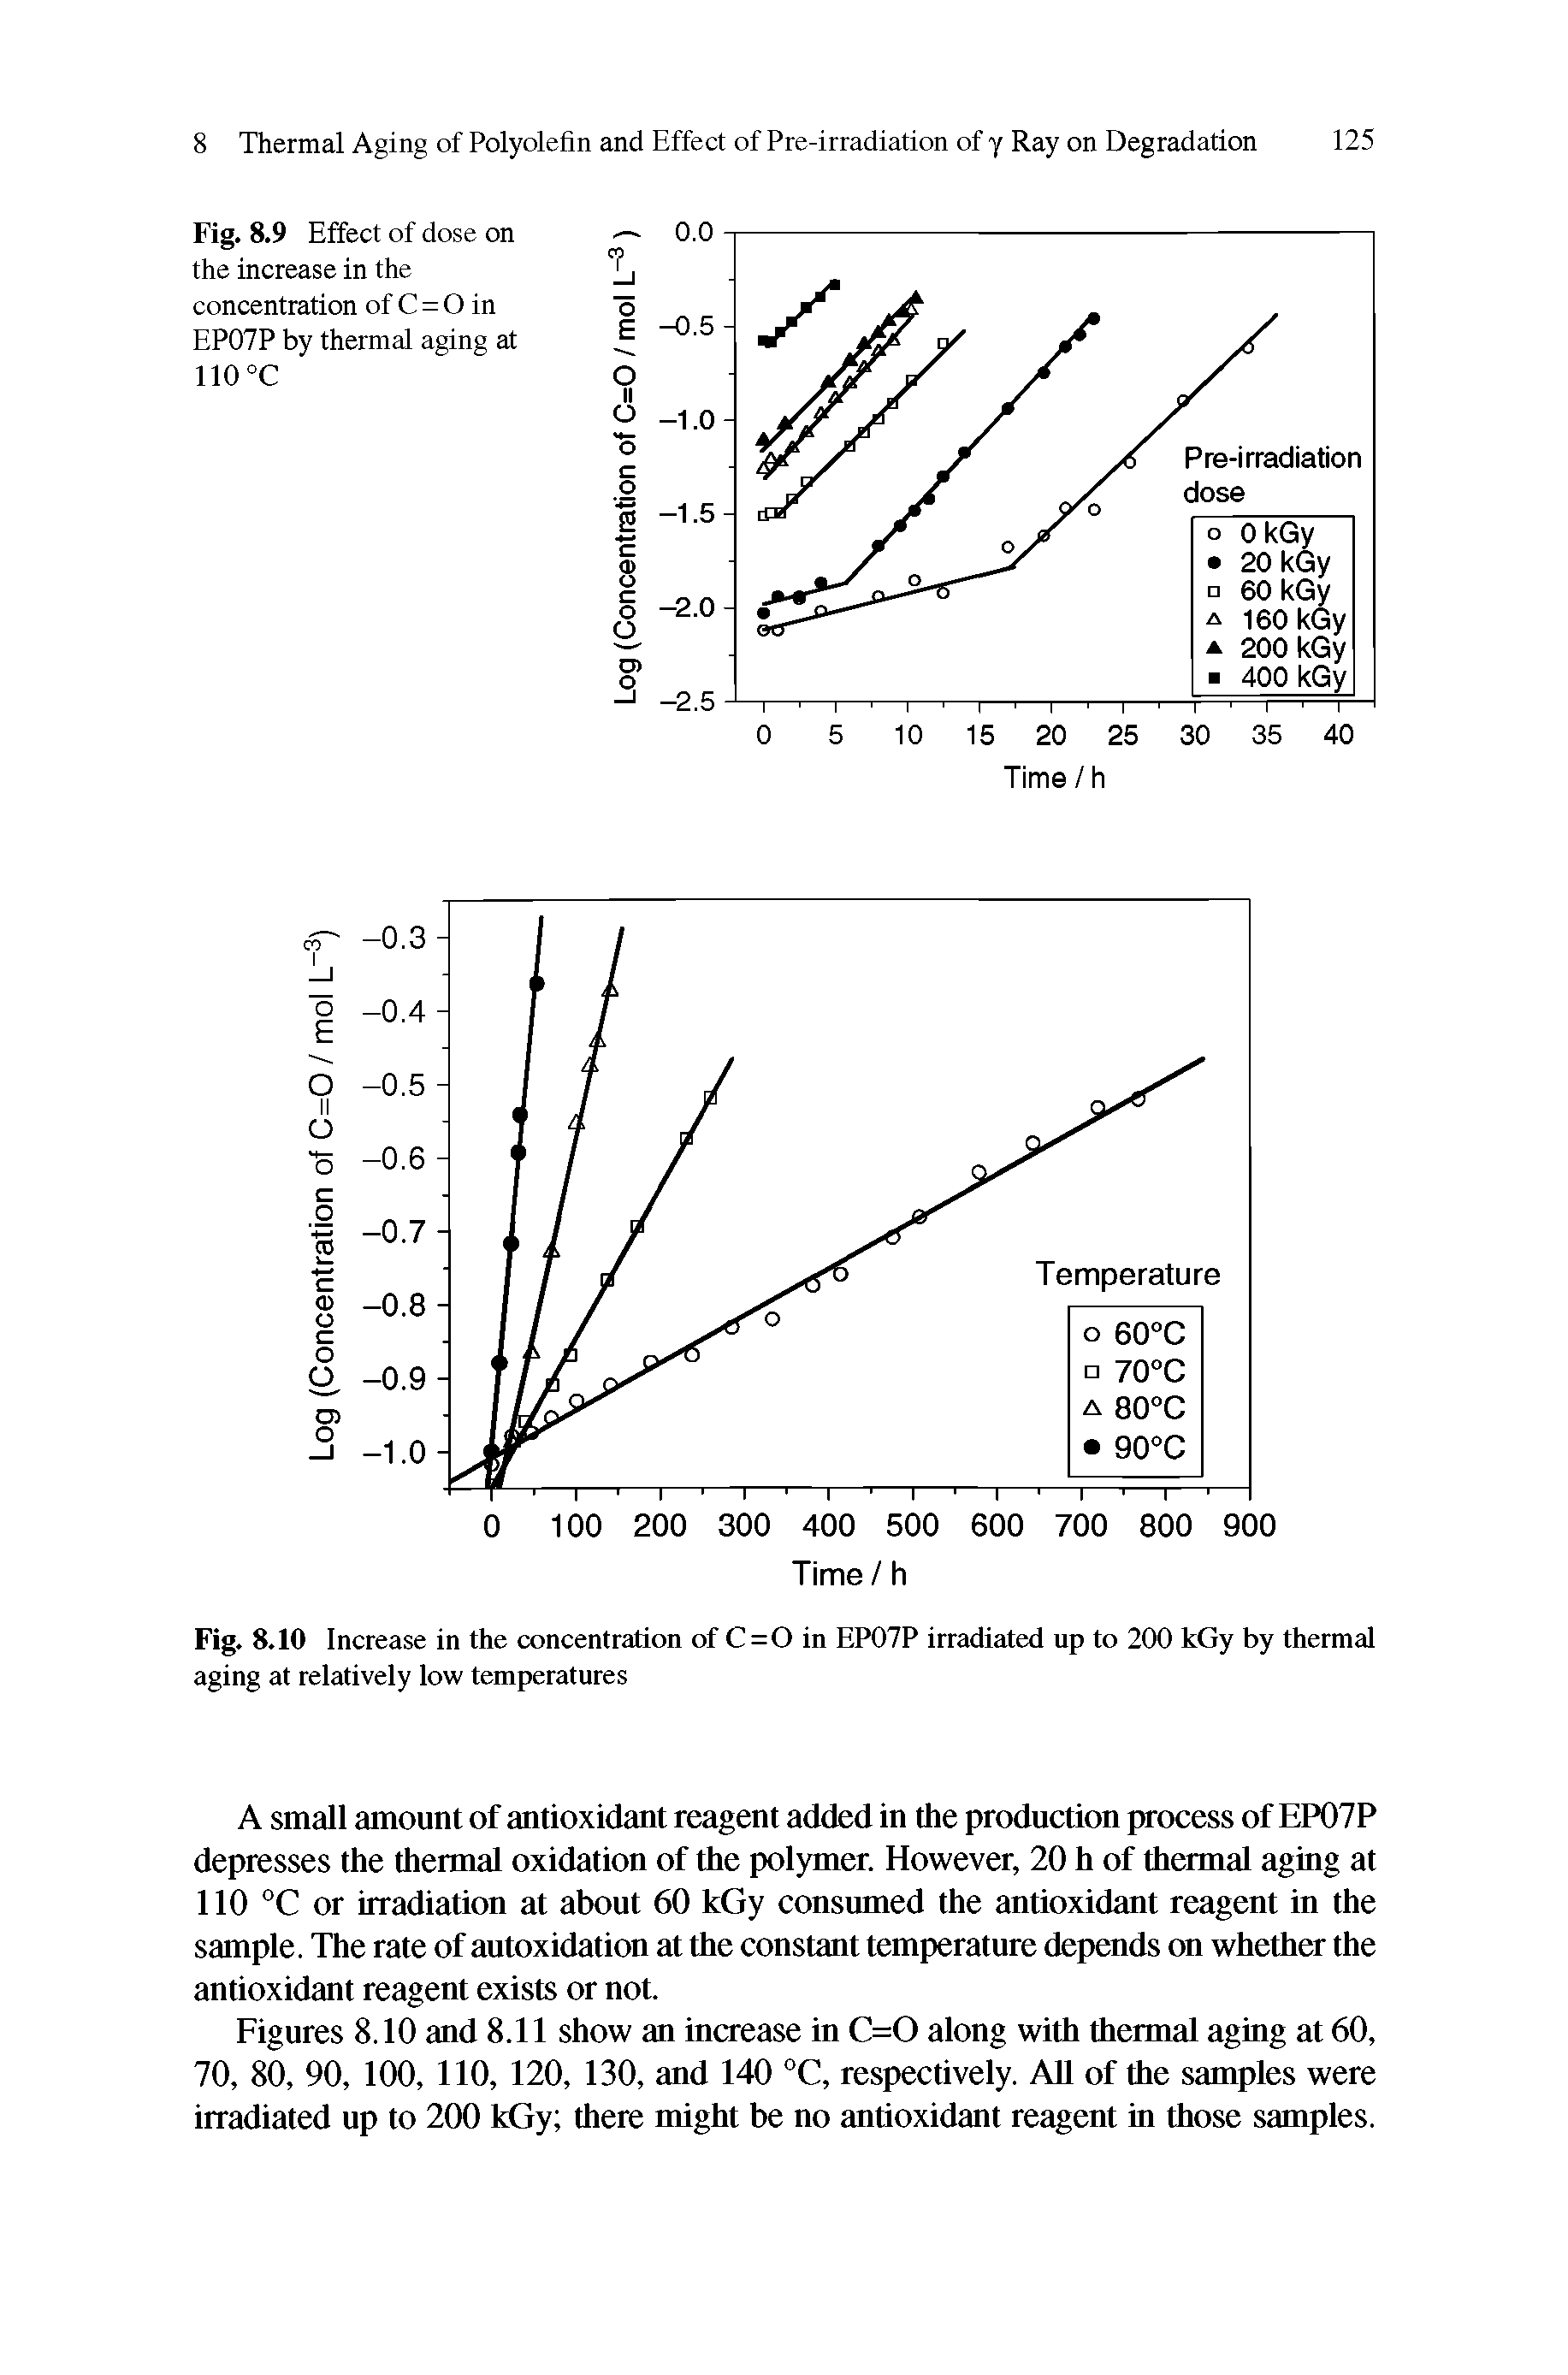 Figures 8.10 and 8.11 show an increase in C=0 along with thermal aging at 60, 70, 80, 90, 100, 110, 120, 130, and 140 °C, respectively. All of the samples were irradiated up to 200 kGy there might be no antioxidant reagent in those samples.